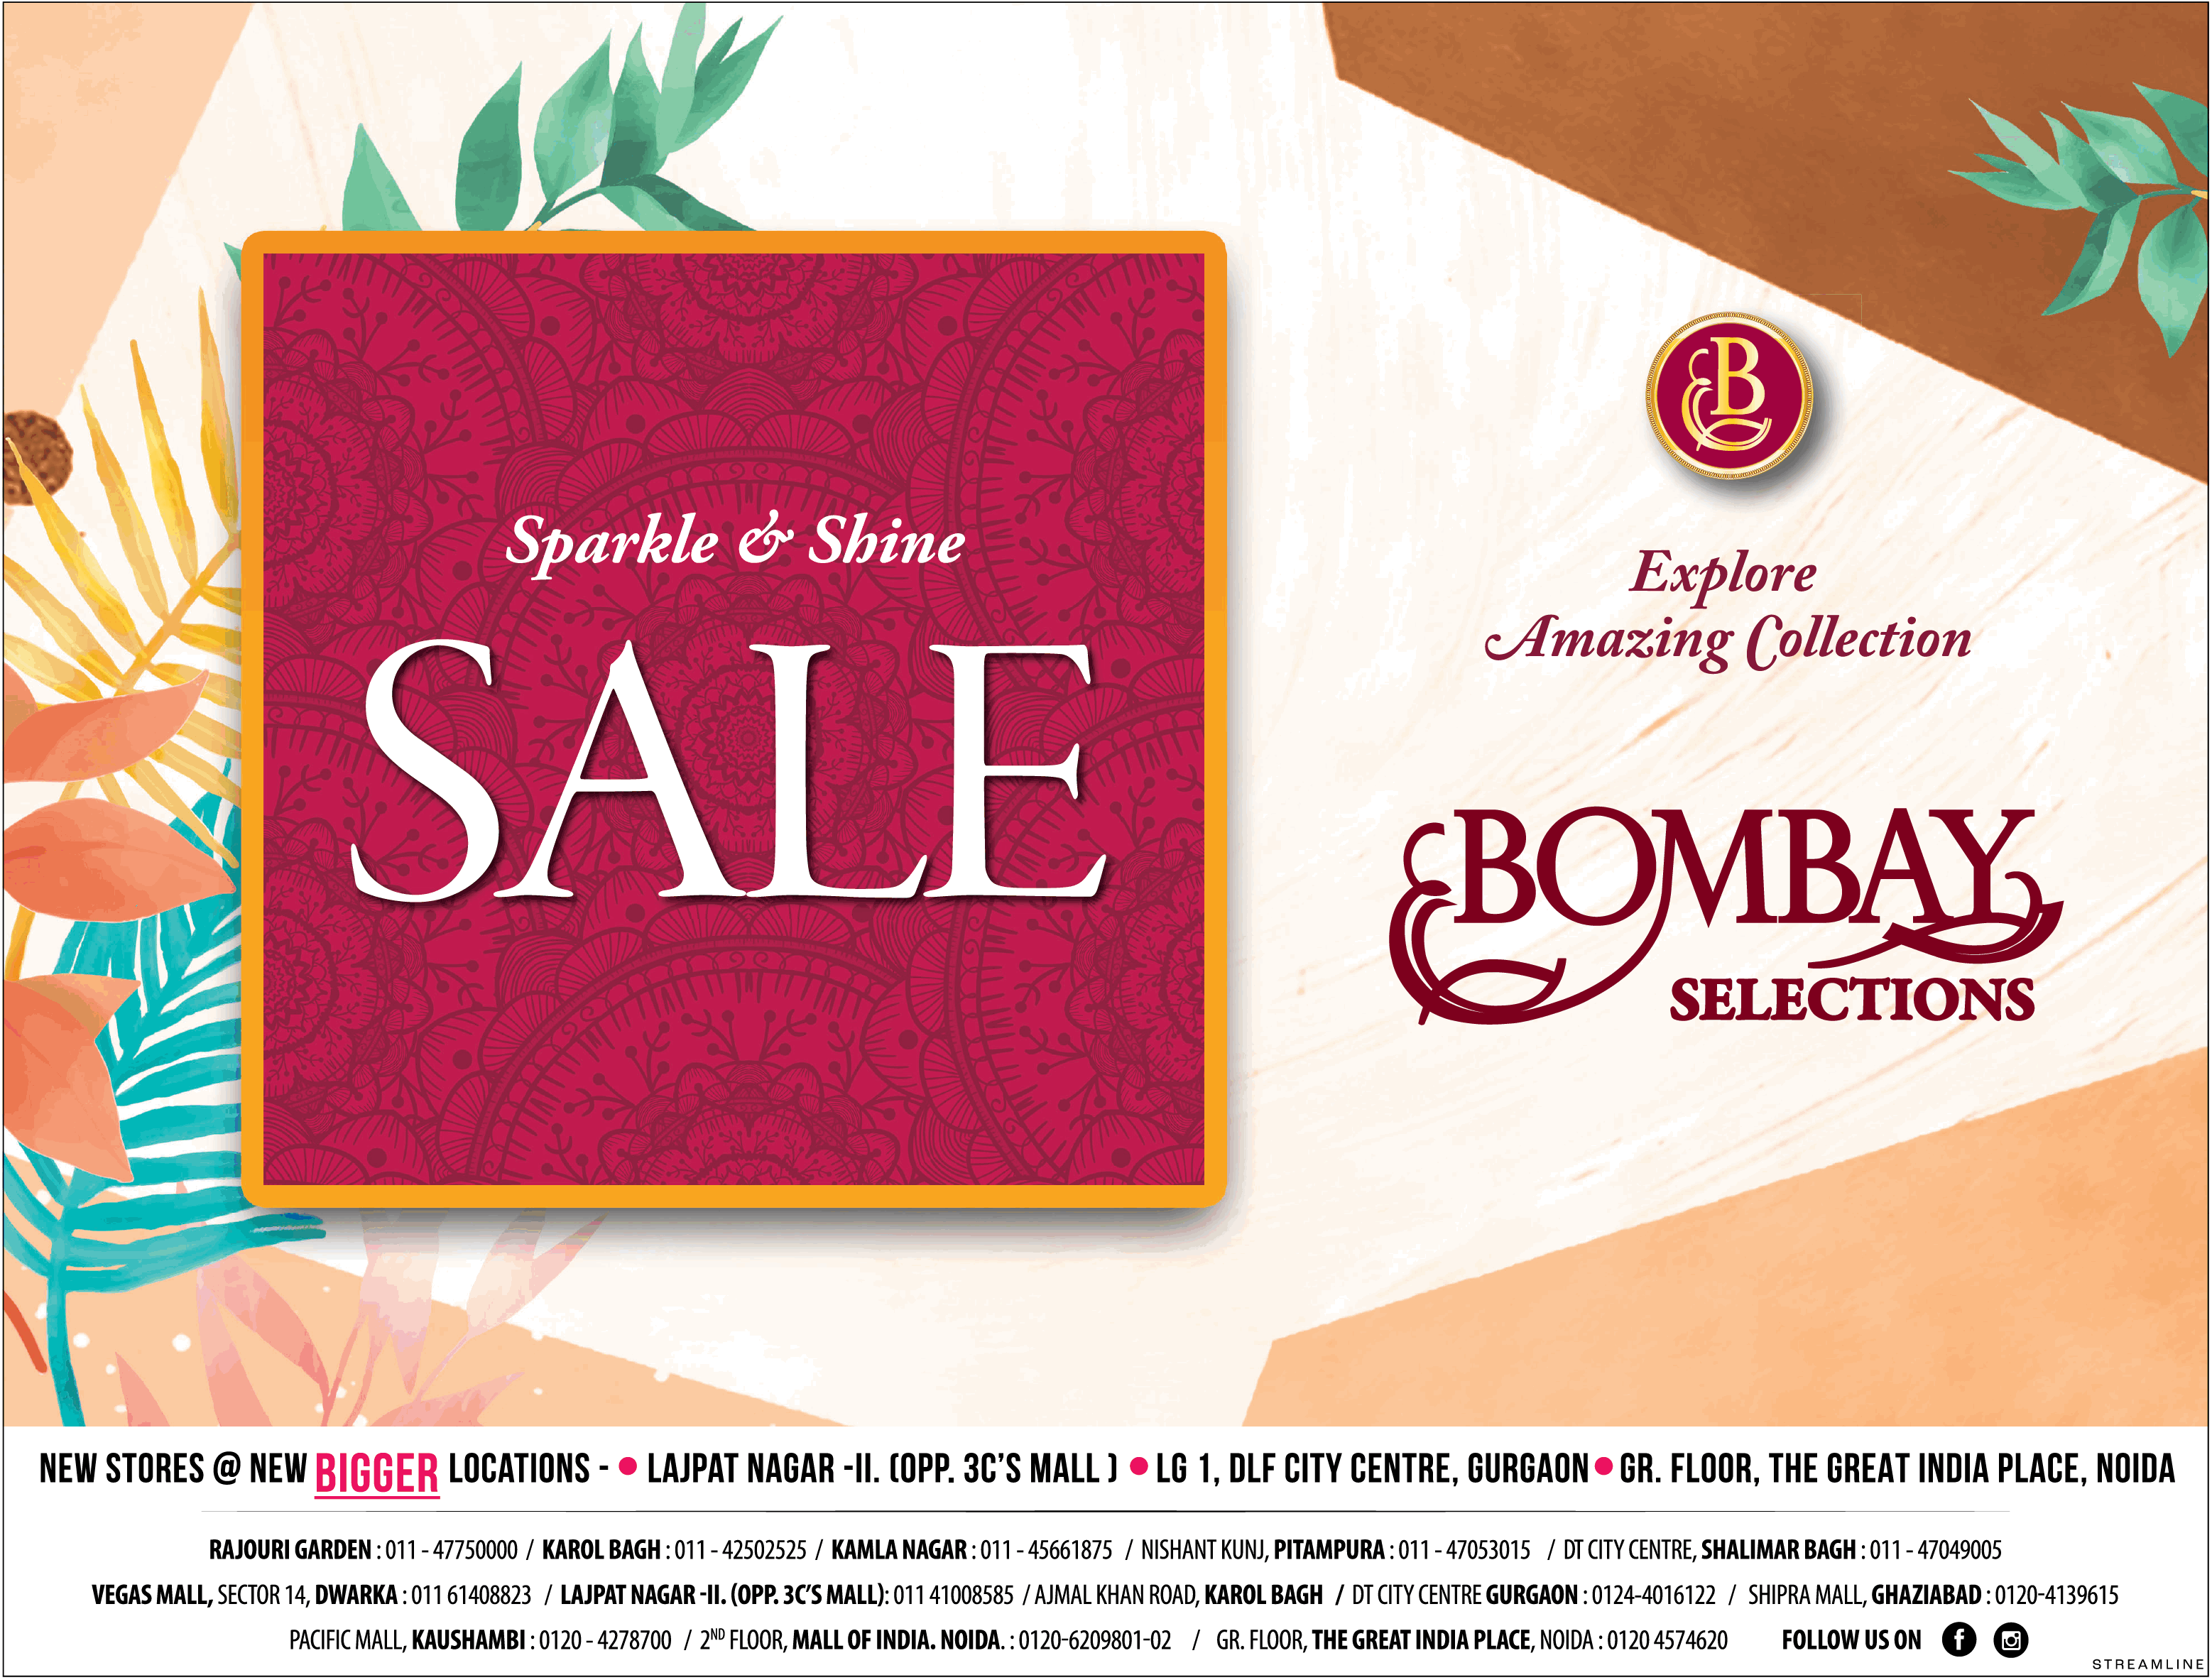 bombay-selections-sparkle-&-shine-sale-new-stores-@-bigger-locations-lajpat-nagar-clf-city-centre-the-great-india-place-ad-times-of-india-delhi-10-7-2021